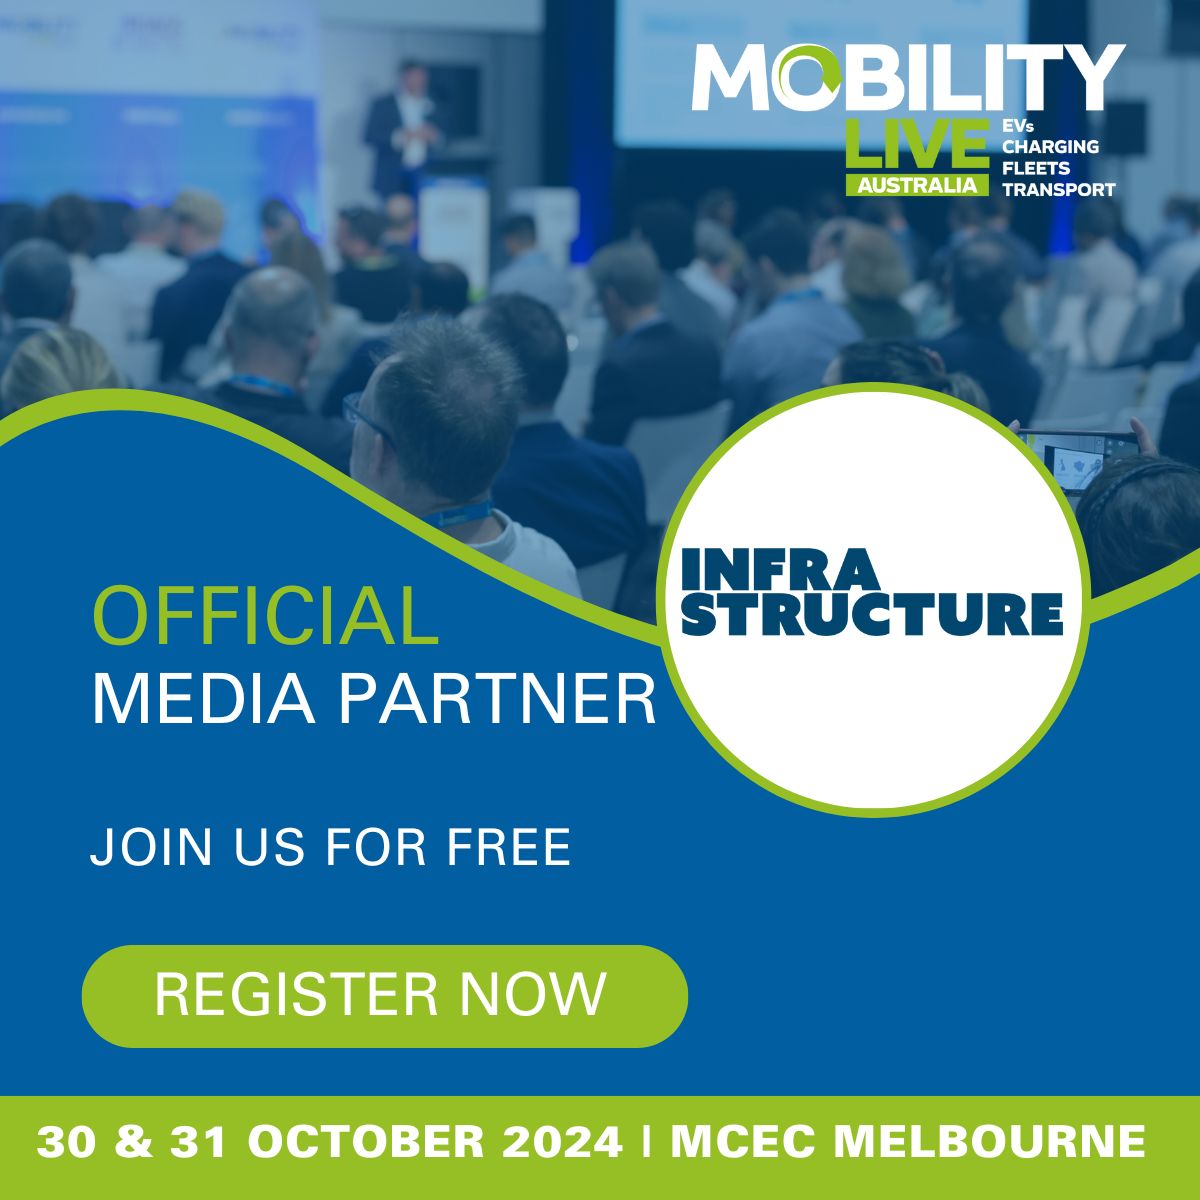 Thrilled to announce Infrastructure Magazine as our official Media Partner for Mobility LIVE 2024! 

Join us on 30 & 31 October at the Melbourne Convention & Exhibition Centre. 

#InfrastructureMagazine #MediaPartner #MobilityLIVE